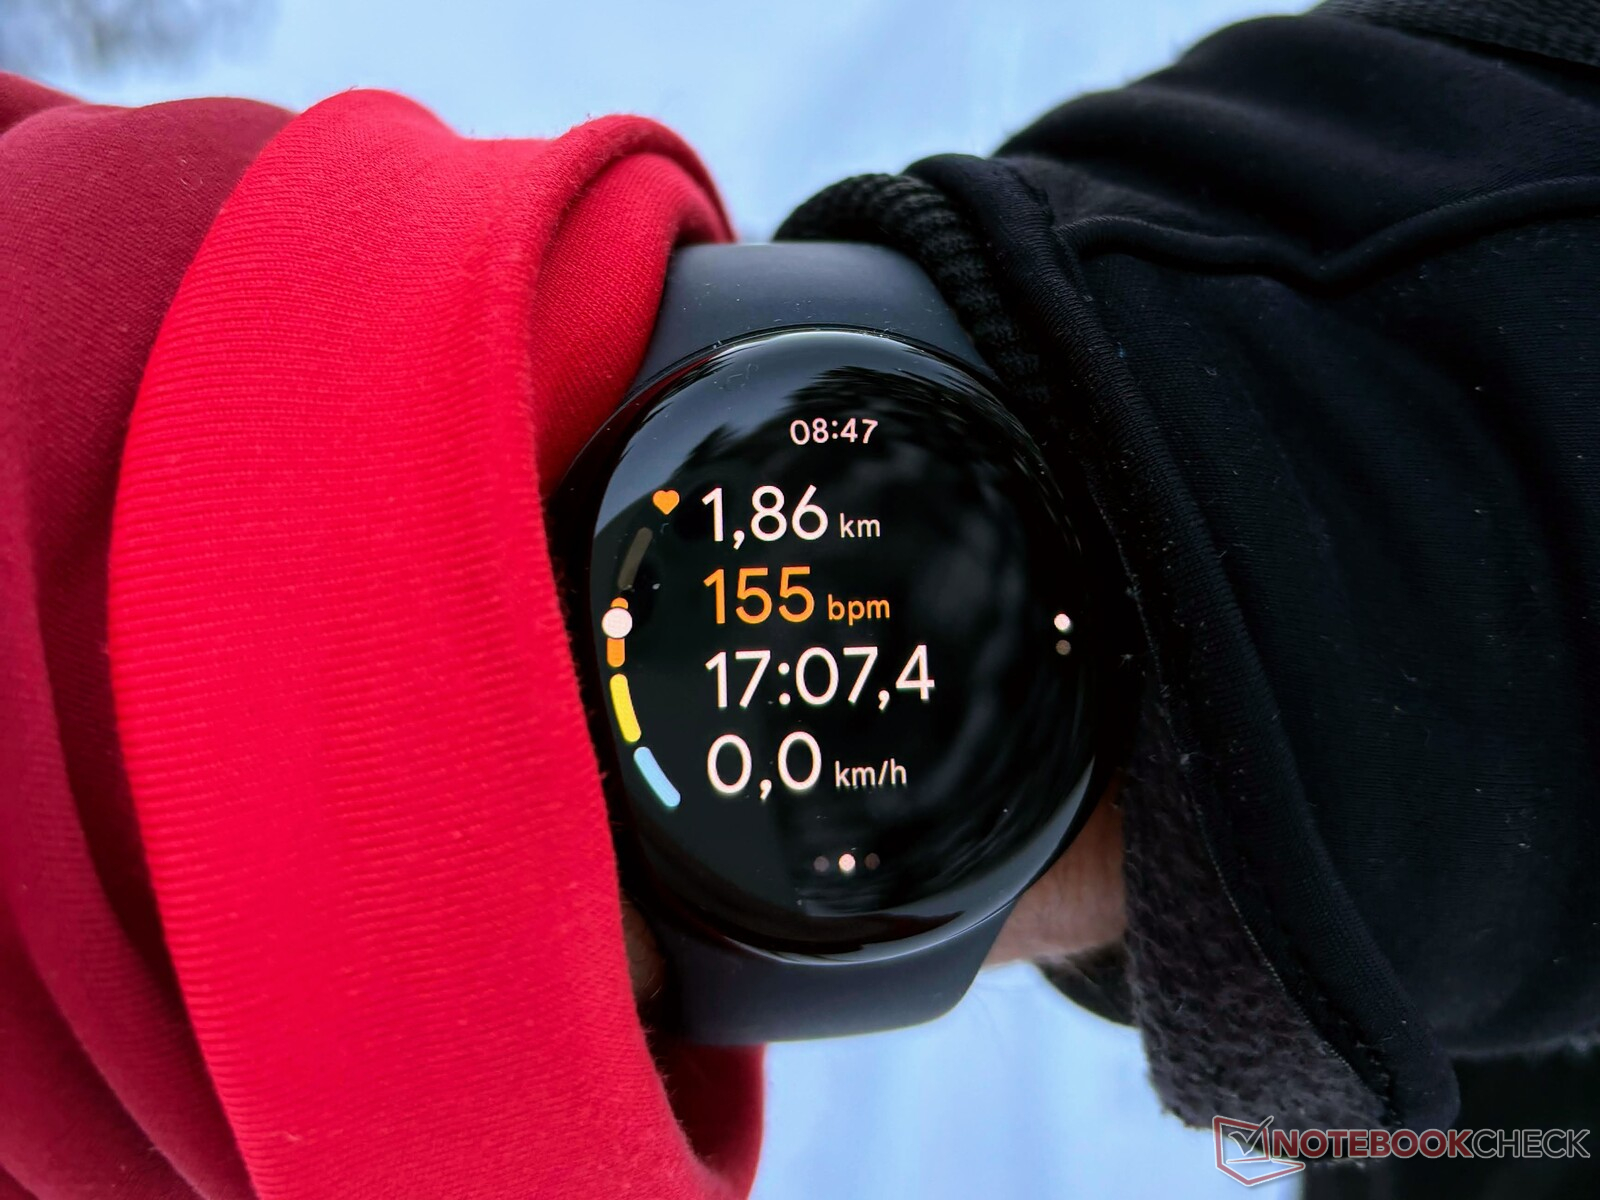 Google and Samsung rumoured to be developing Wear OS 5 based on Android for Galaxy Watch7, Pixel Watch 3 and other smartwatches